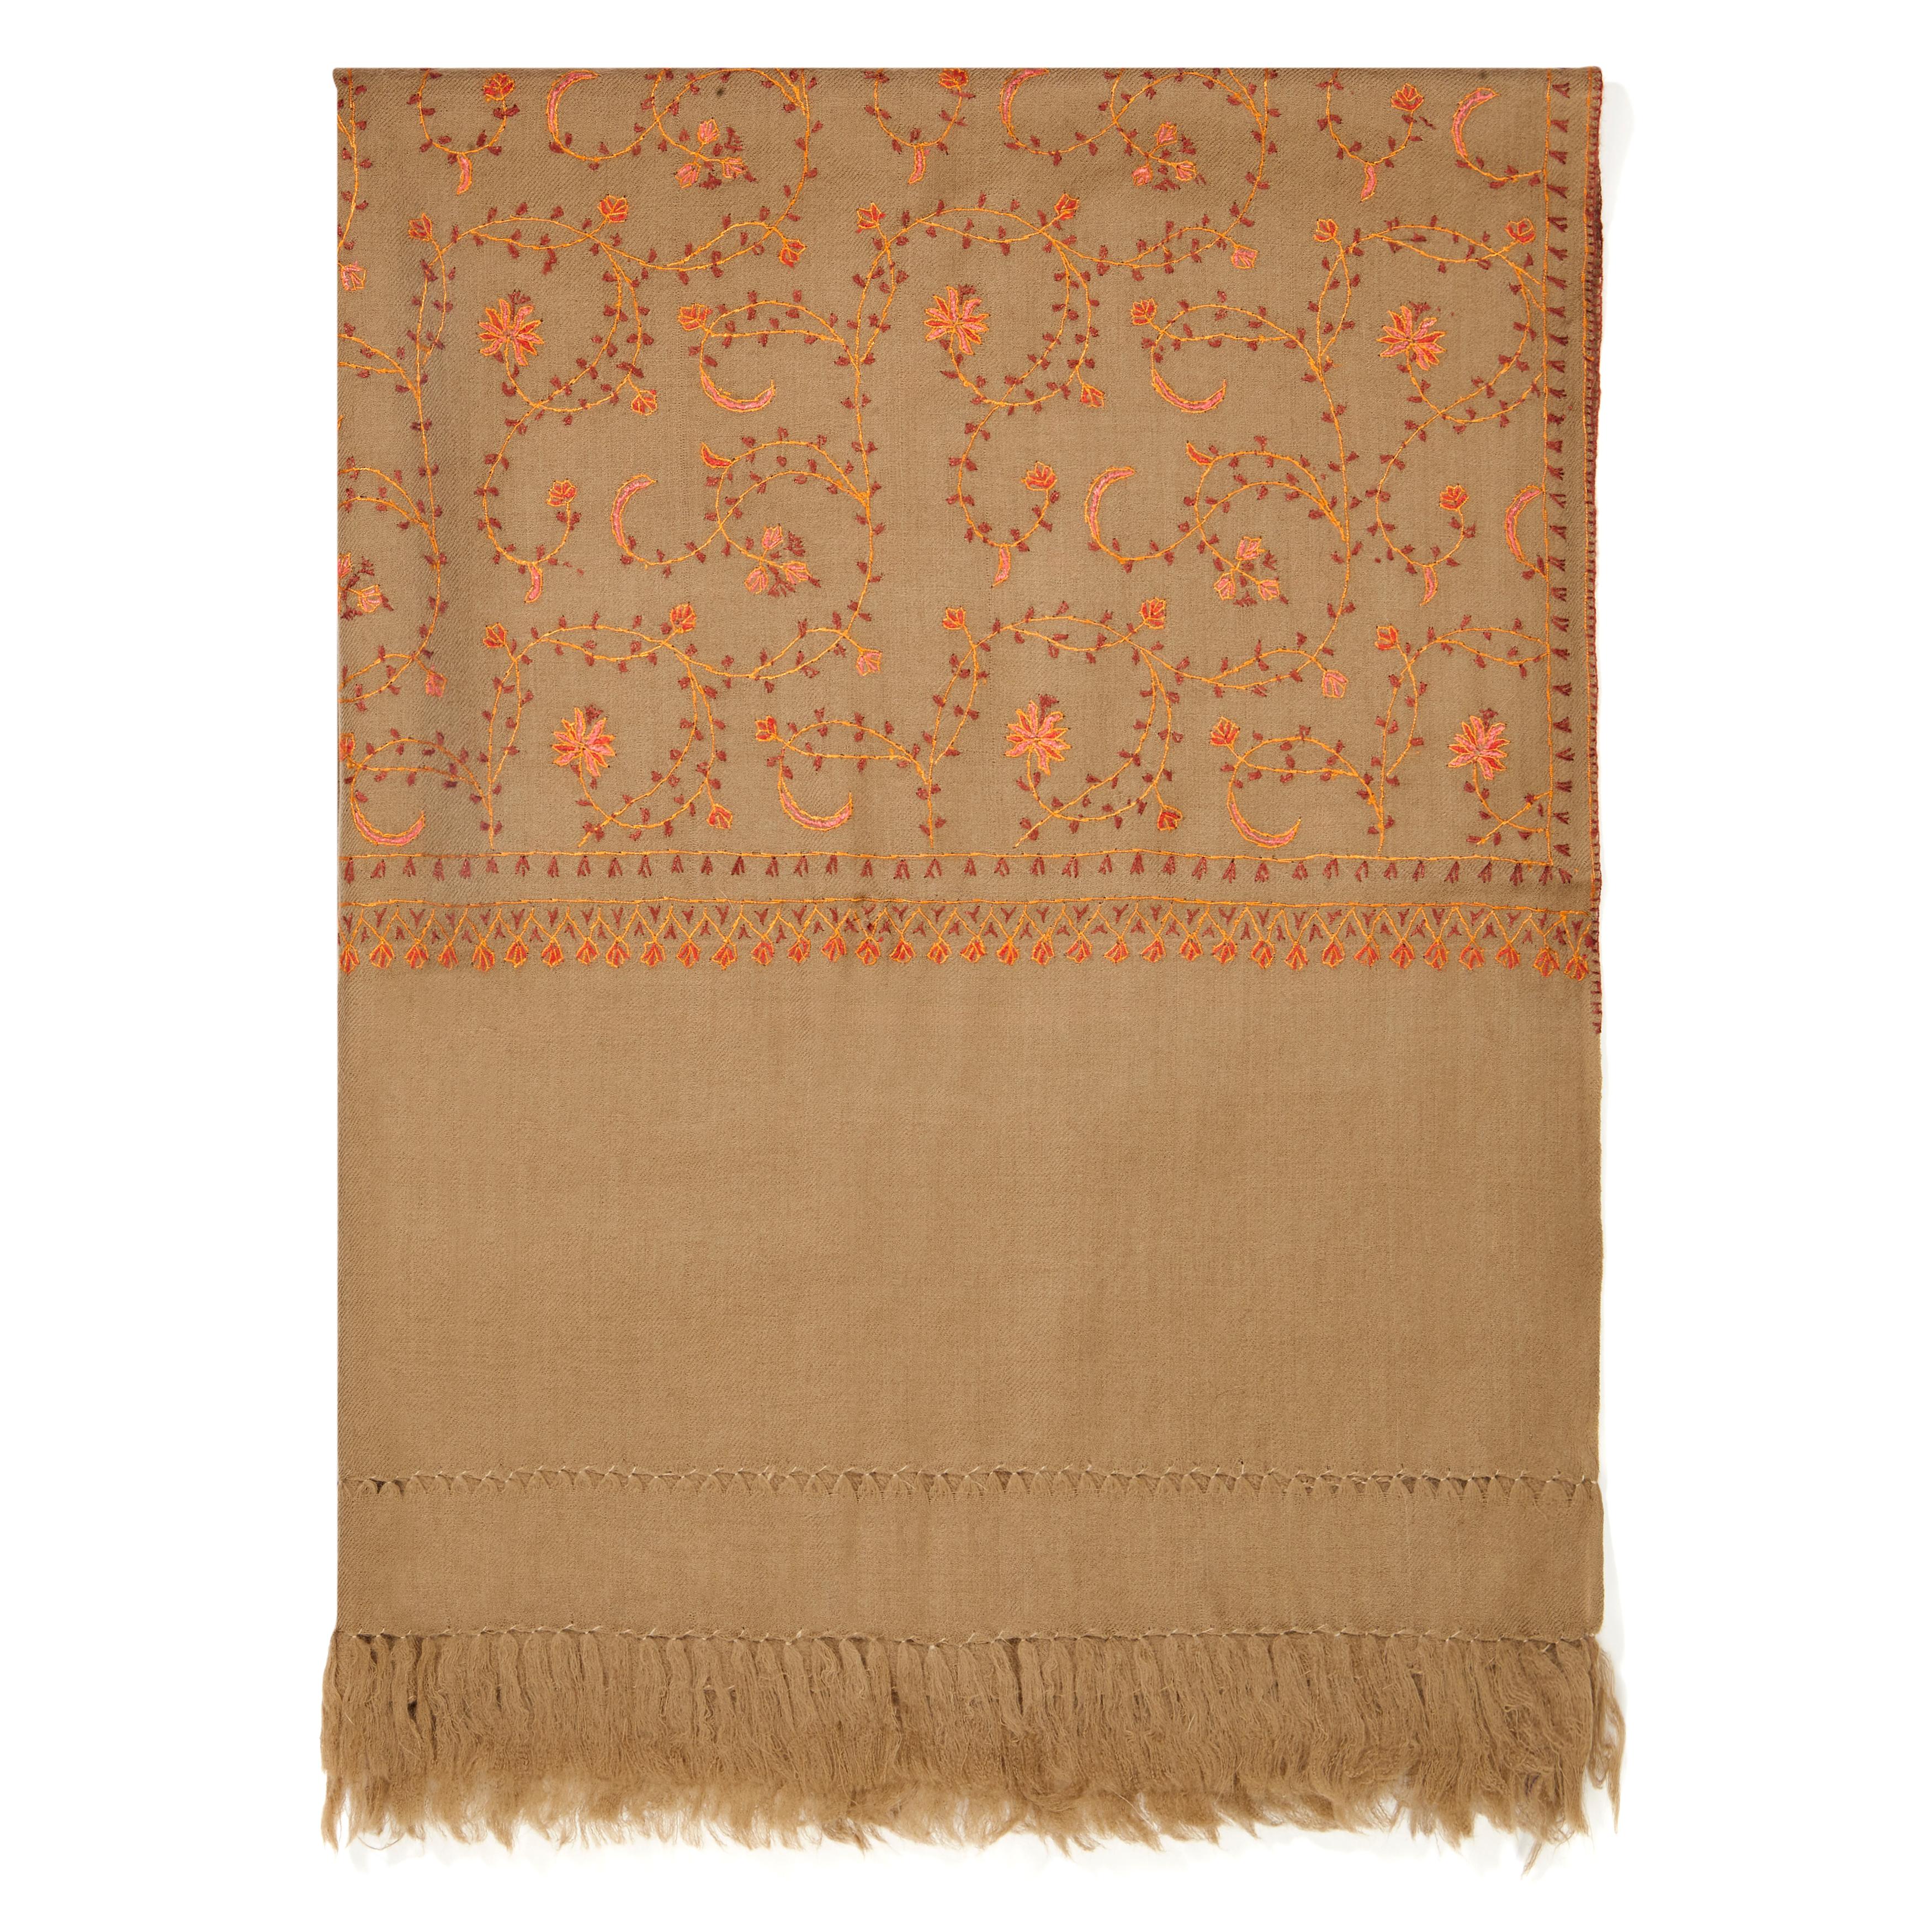 The perfect Christmas gift for someone special - this shawl is unique and handmade. 
This shawl is spun from the finest embroidered woven in 100% cashmere from Kashmir.  The embroidery can take up to 1 year to embroider these shawls and each one is